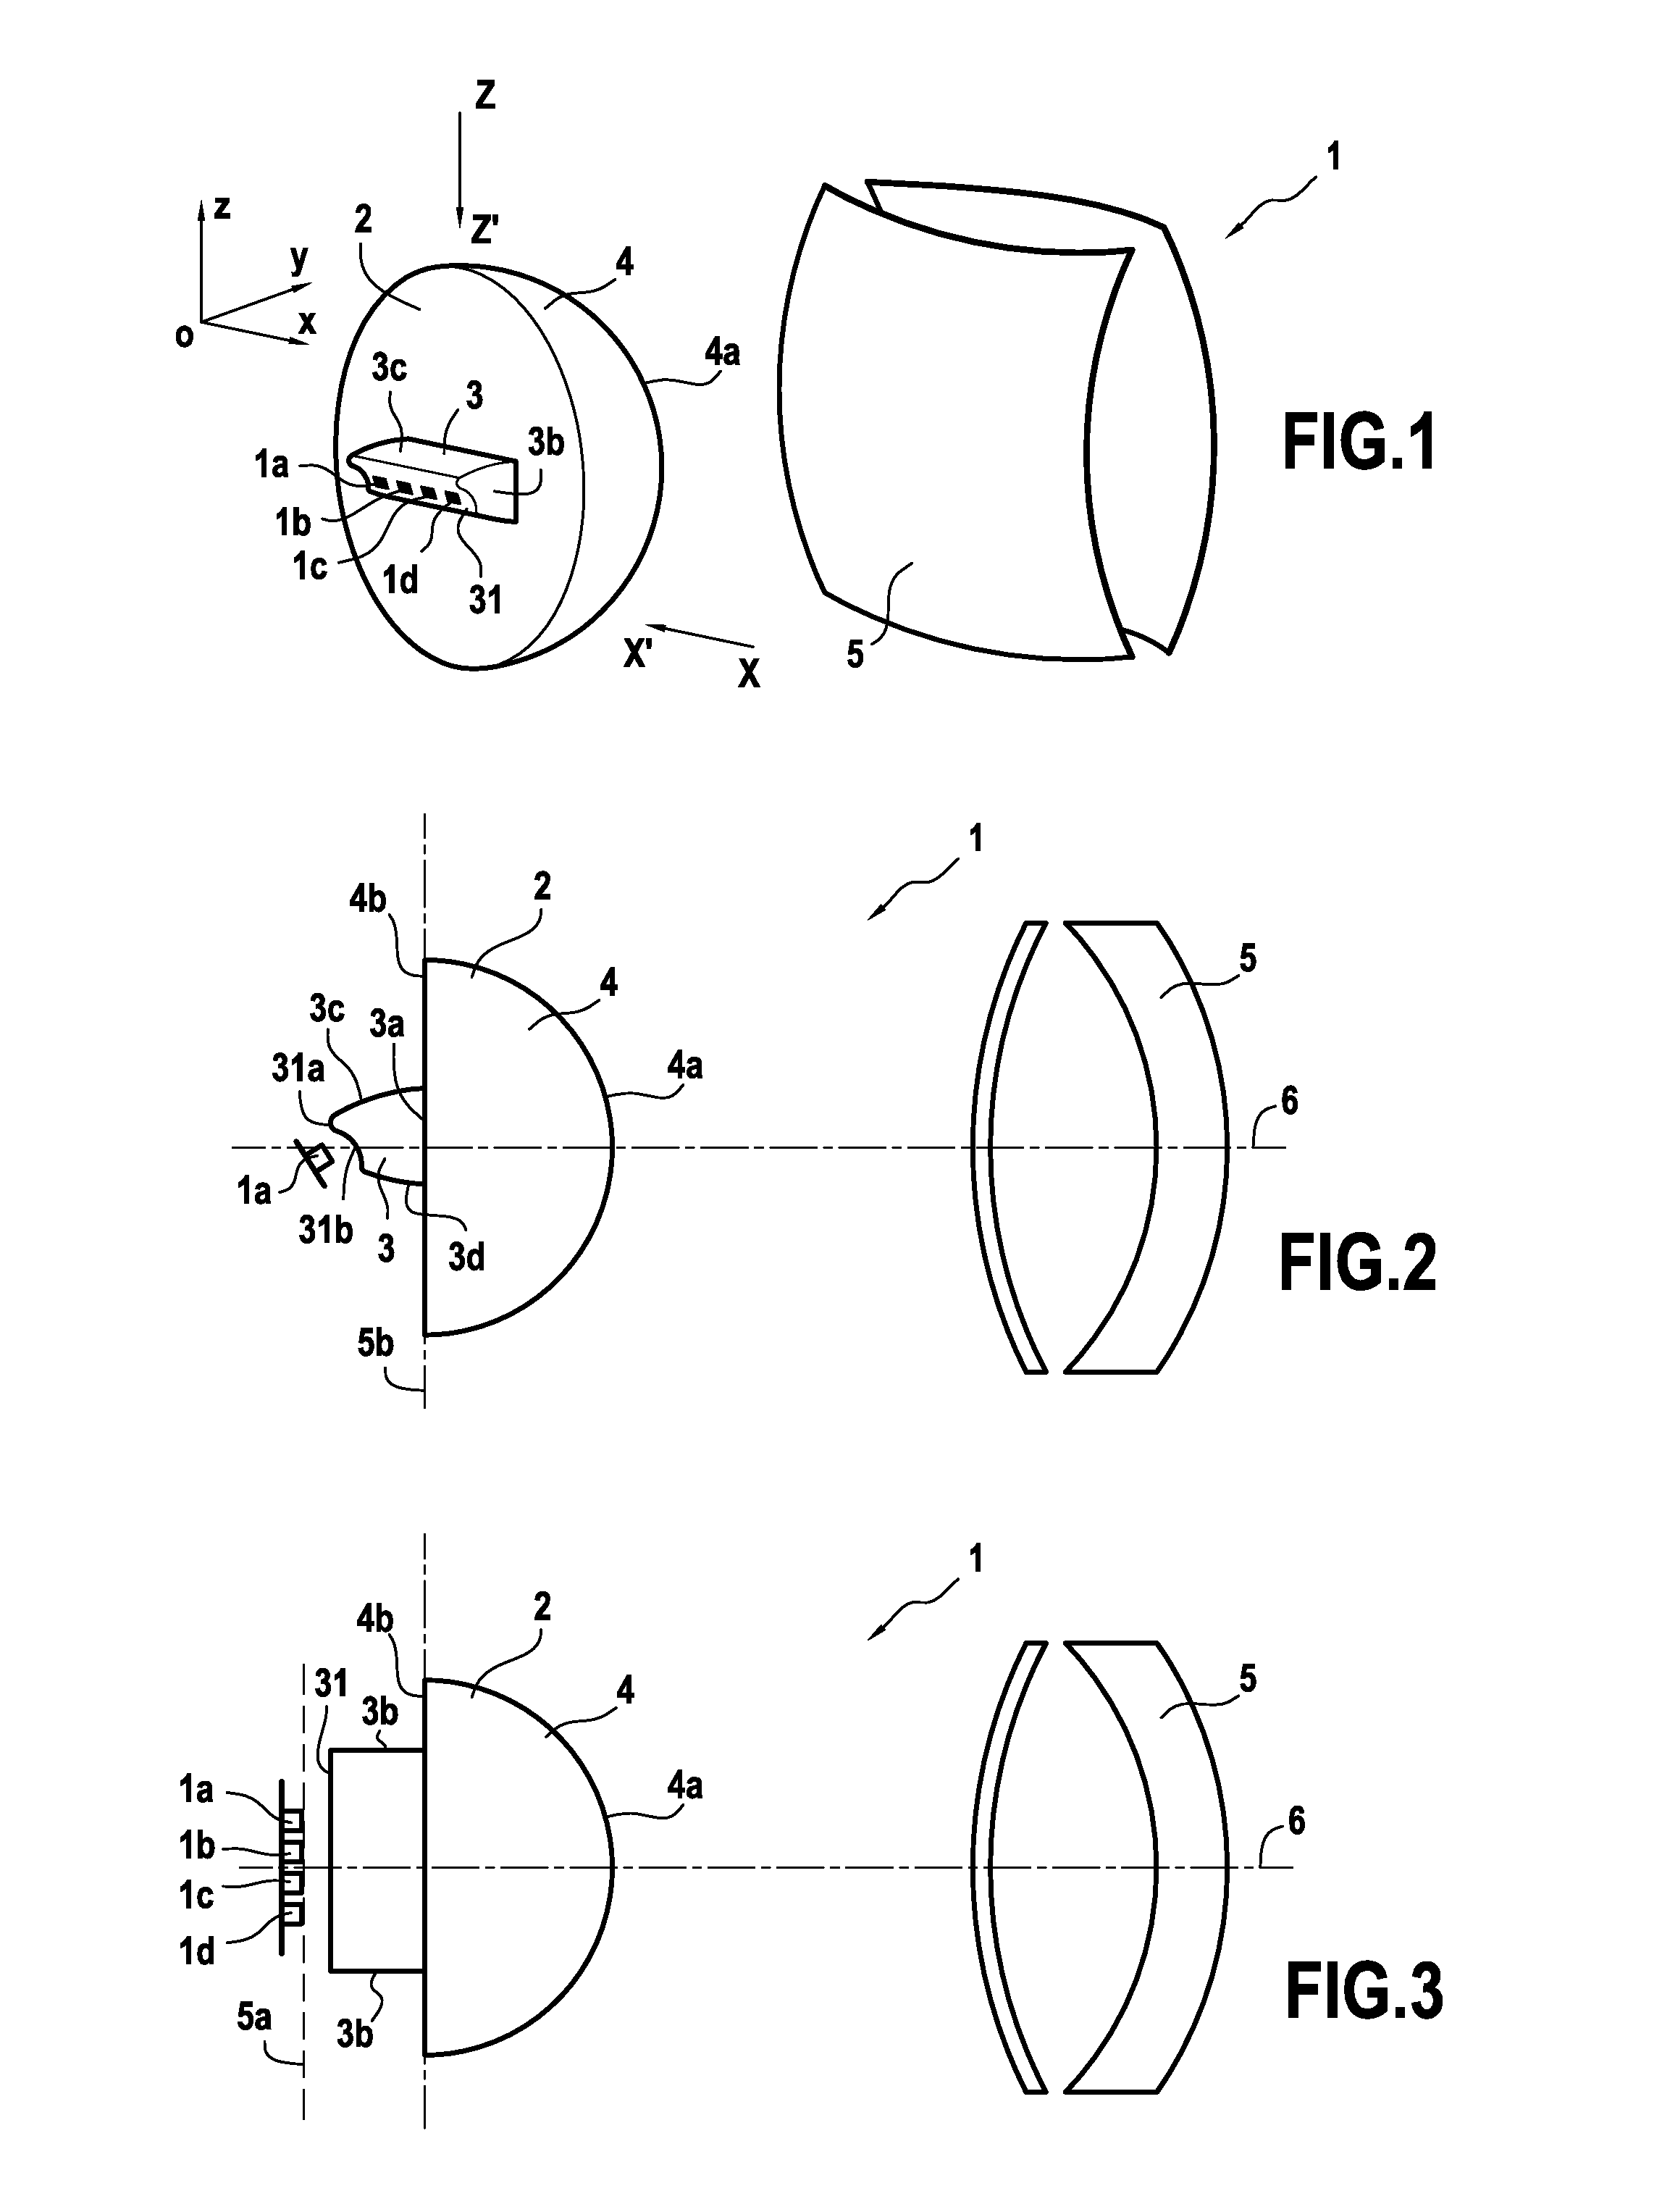 Primary optical element, lighting module and headlamp for a motor vehicle